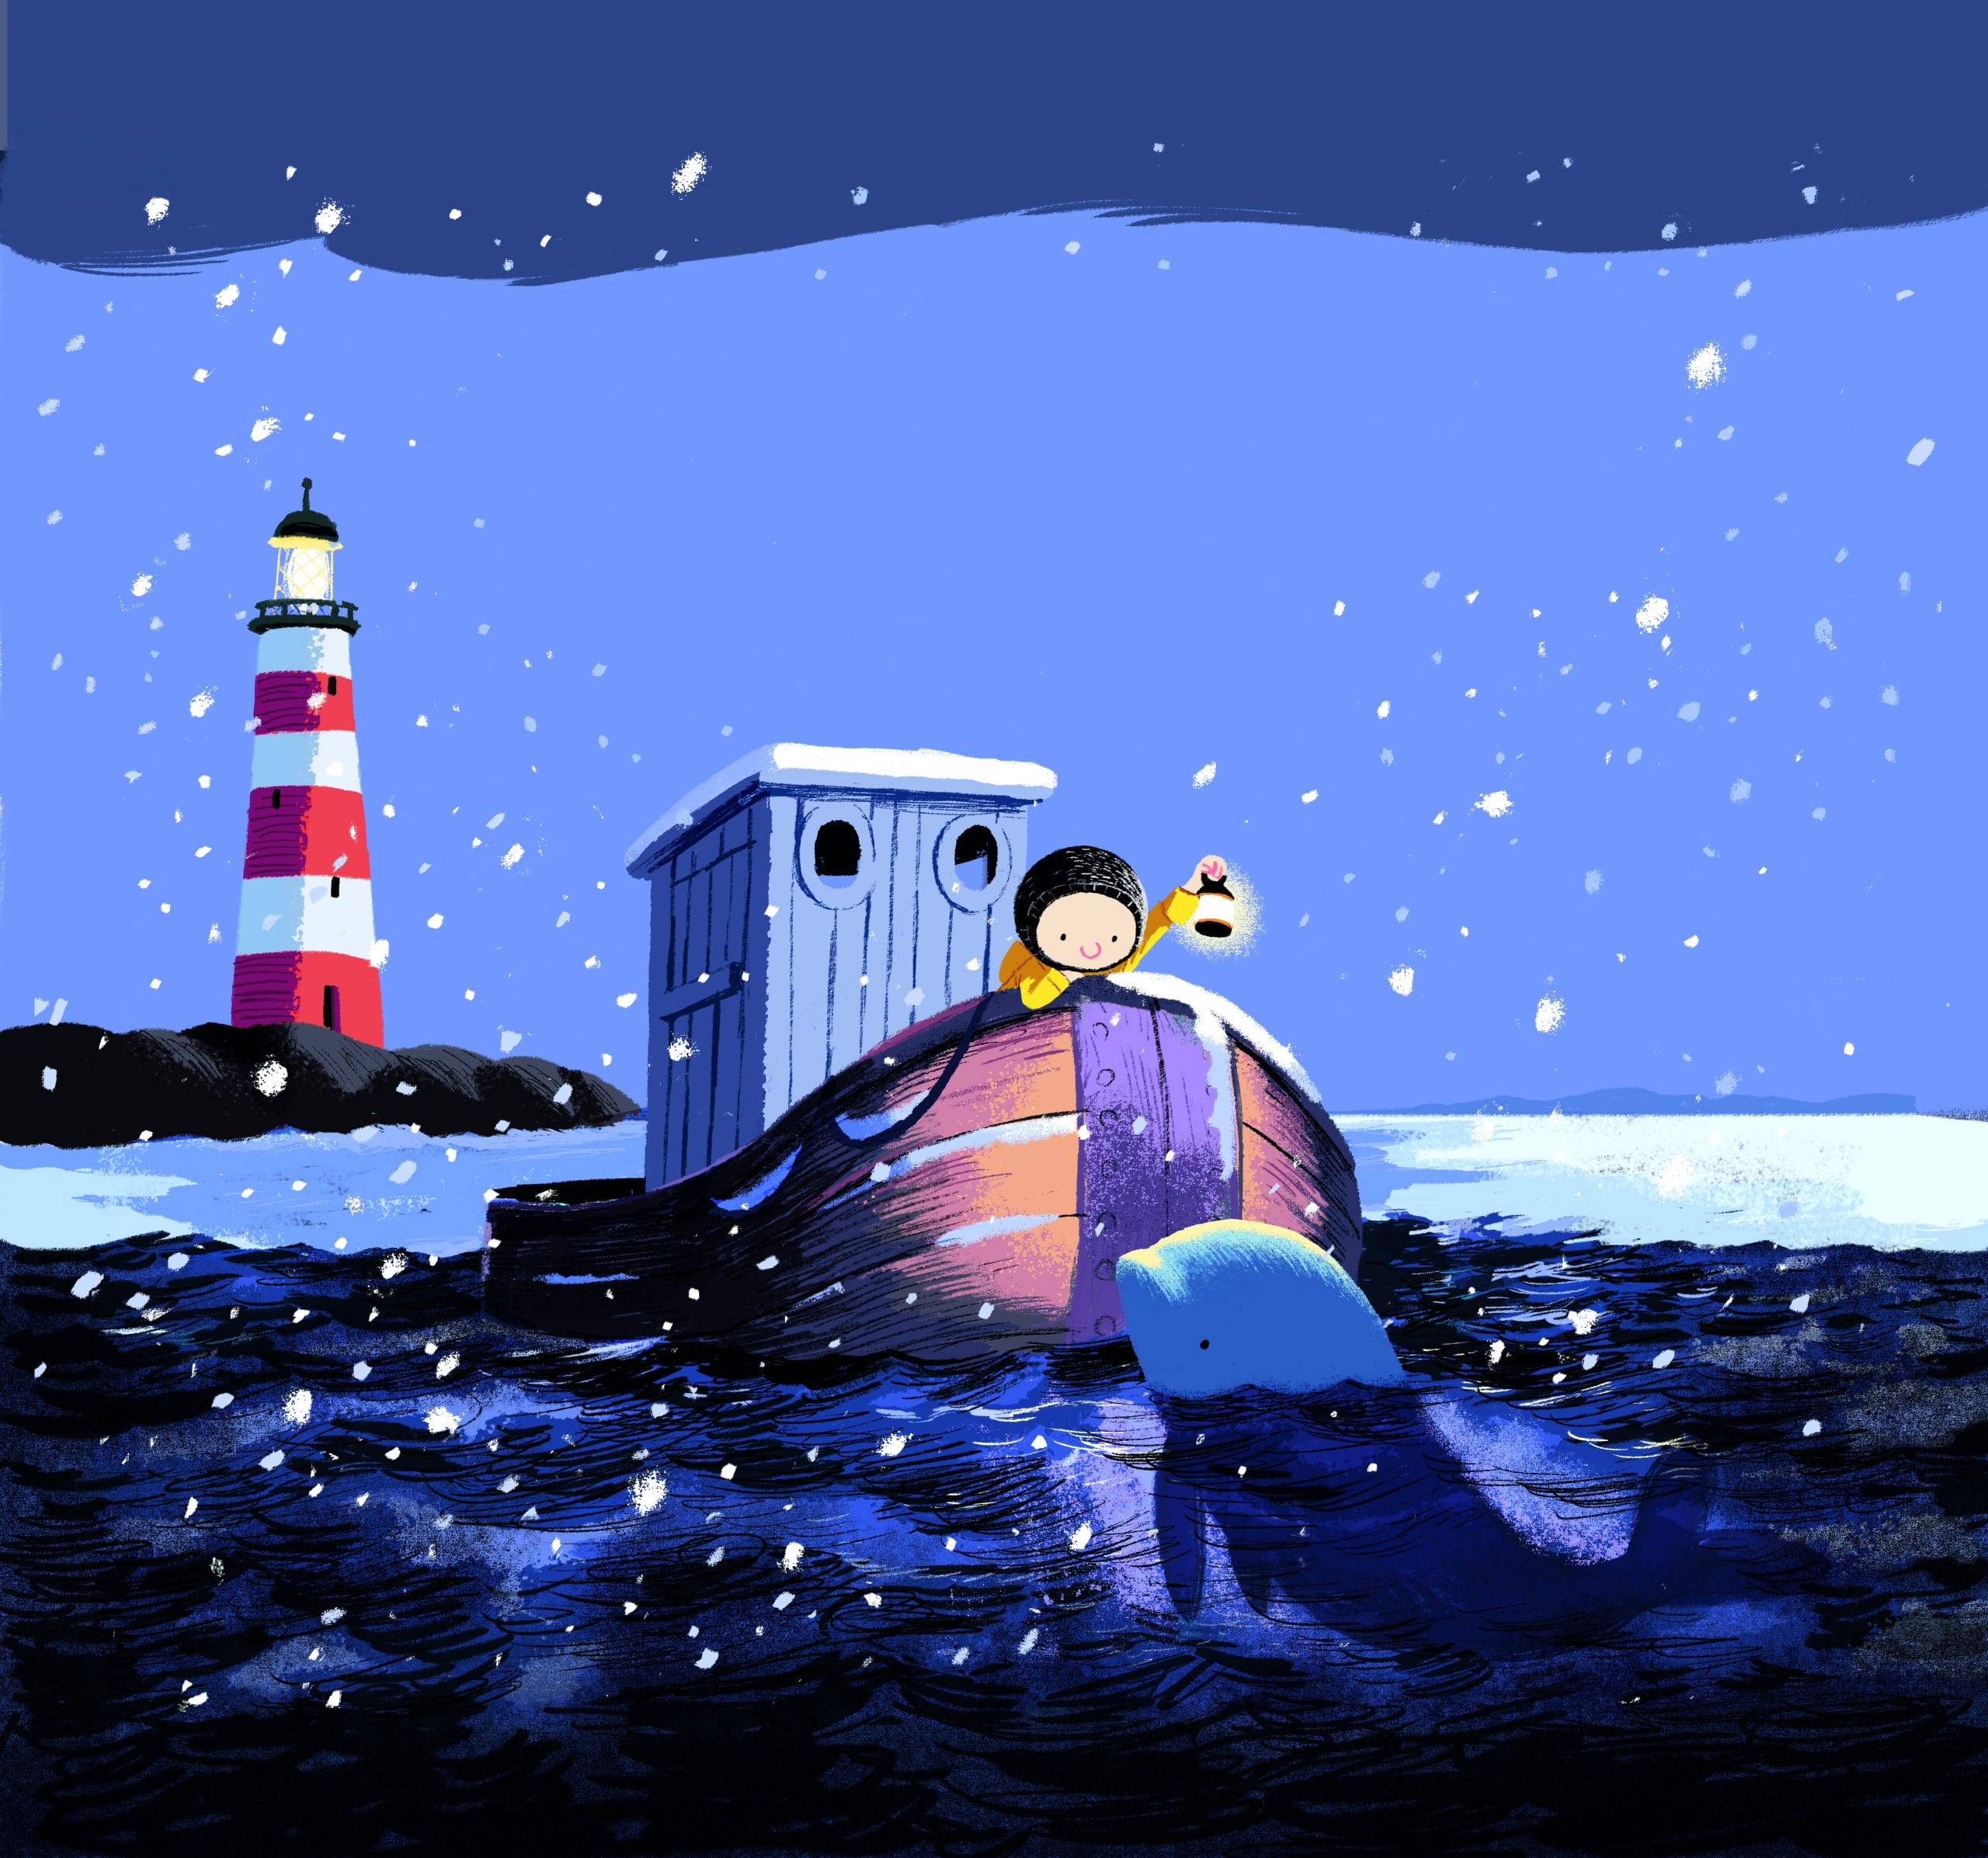 An illustration of a little boy on a boat in the sea and snow looking at a whale